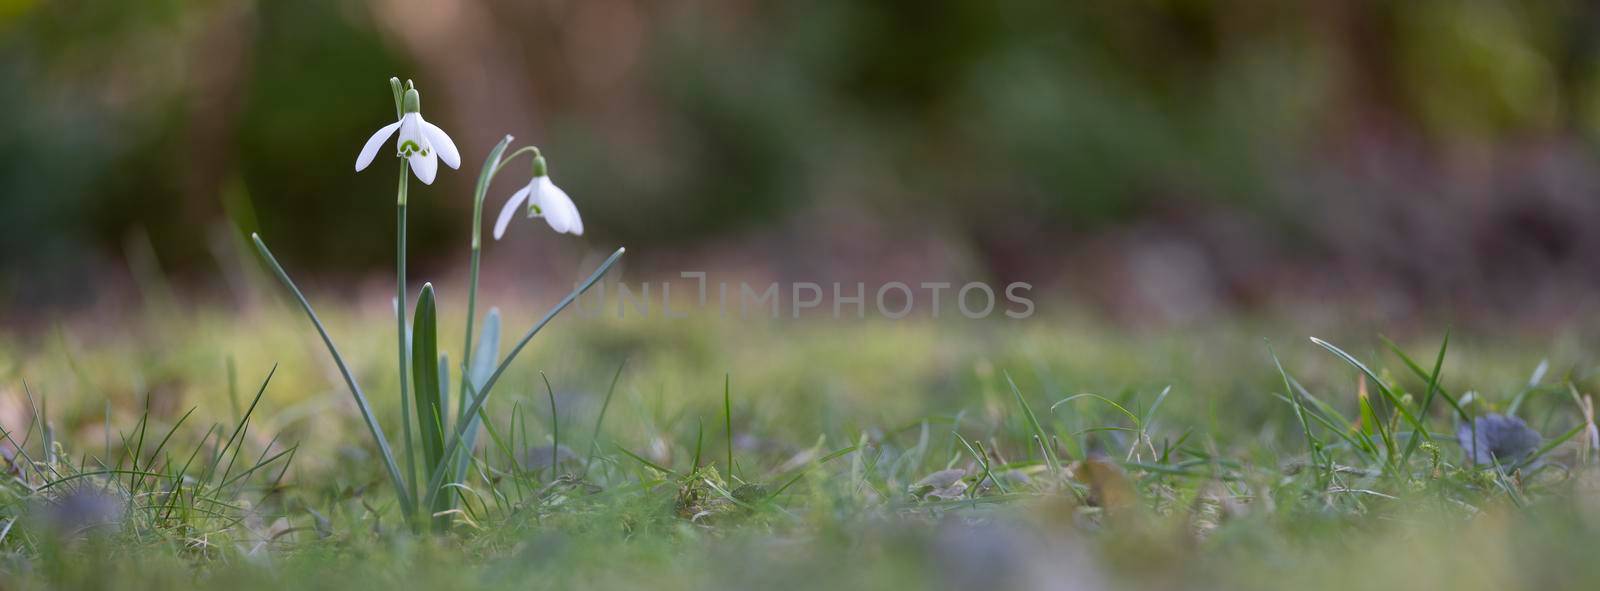 two white snowdrop flowers against out of focus background